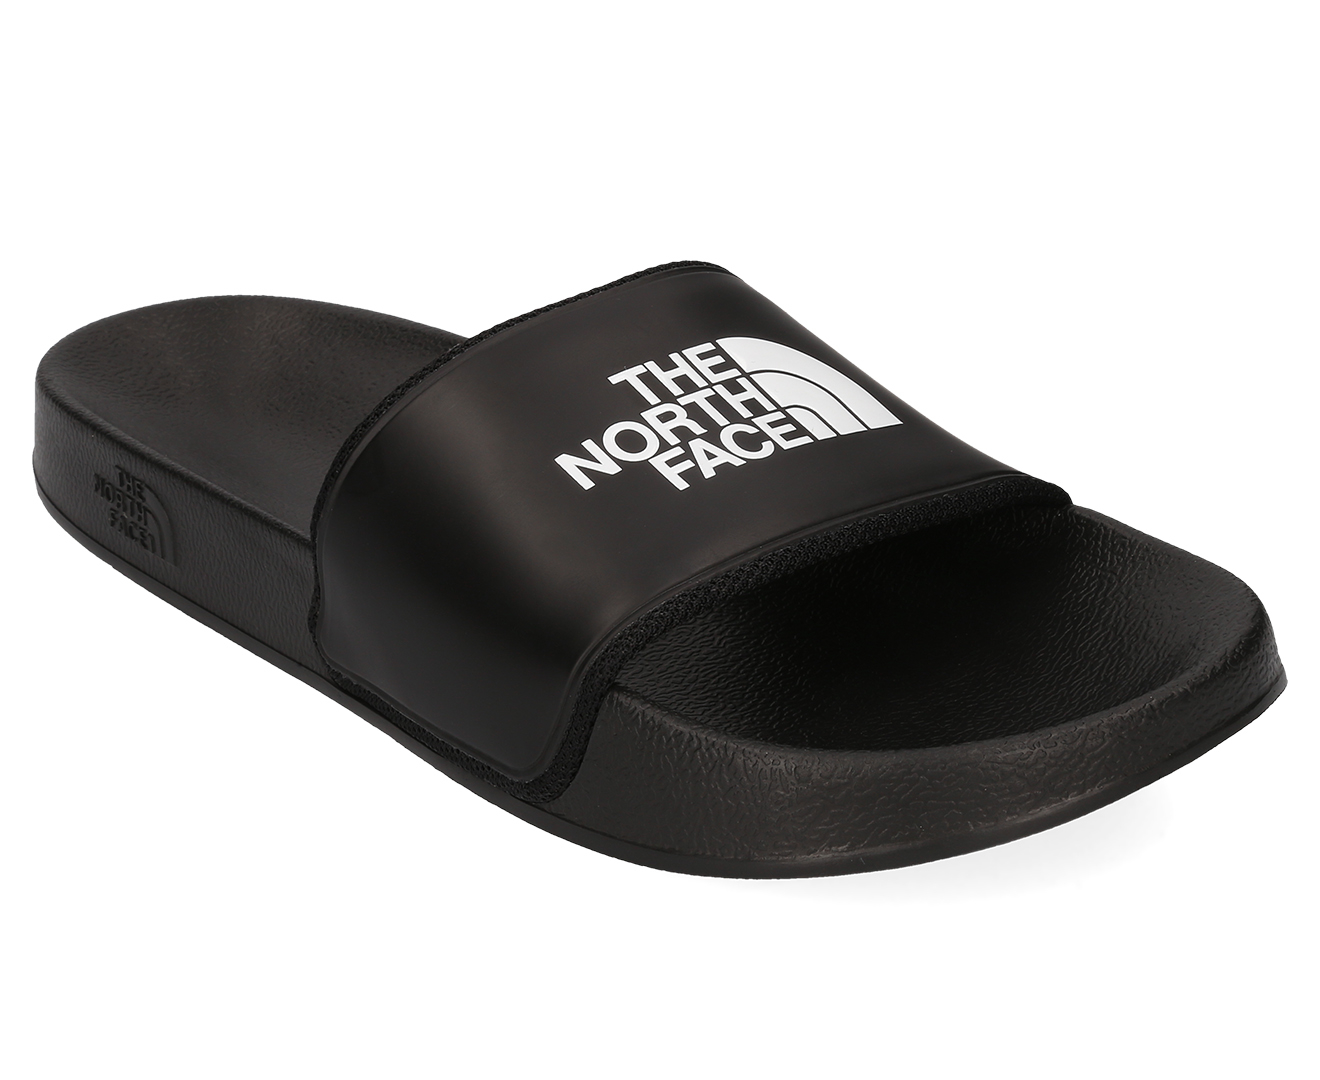 north face sliders white